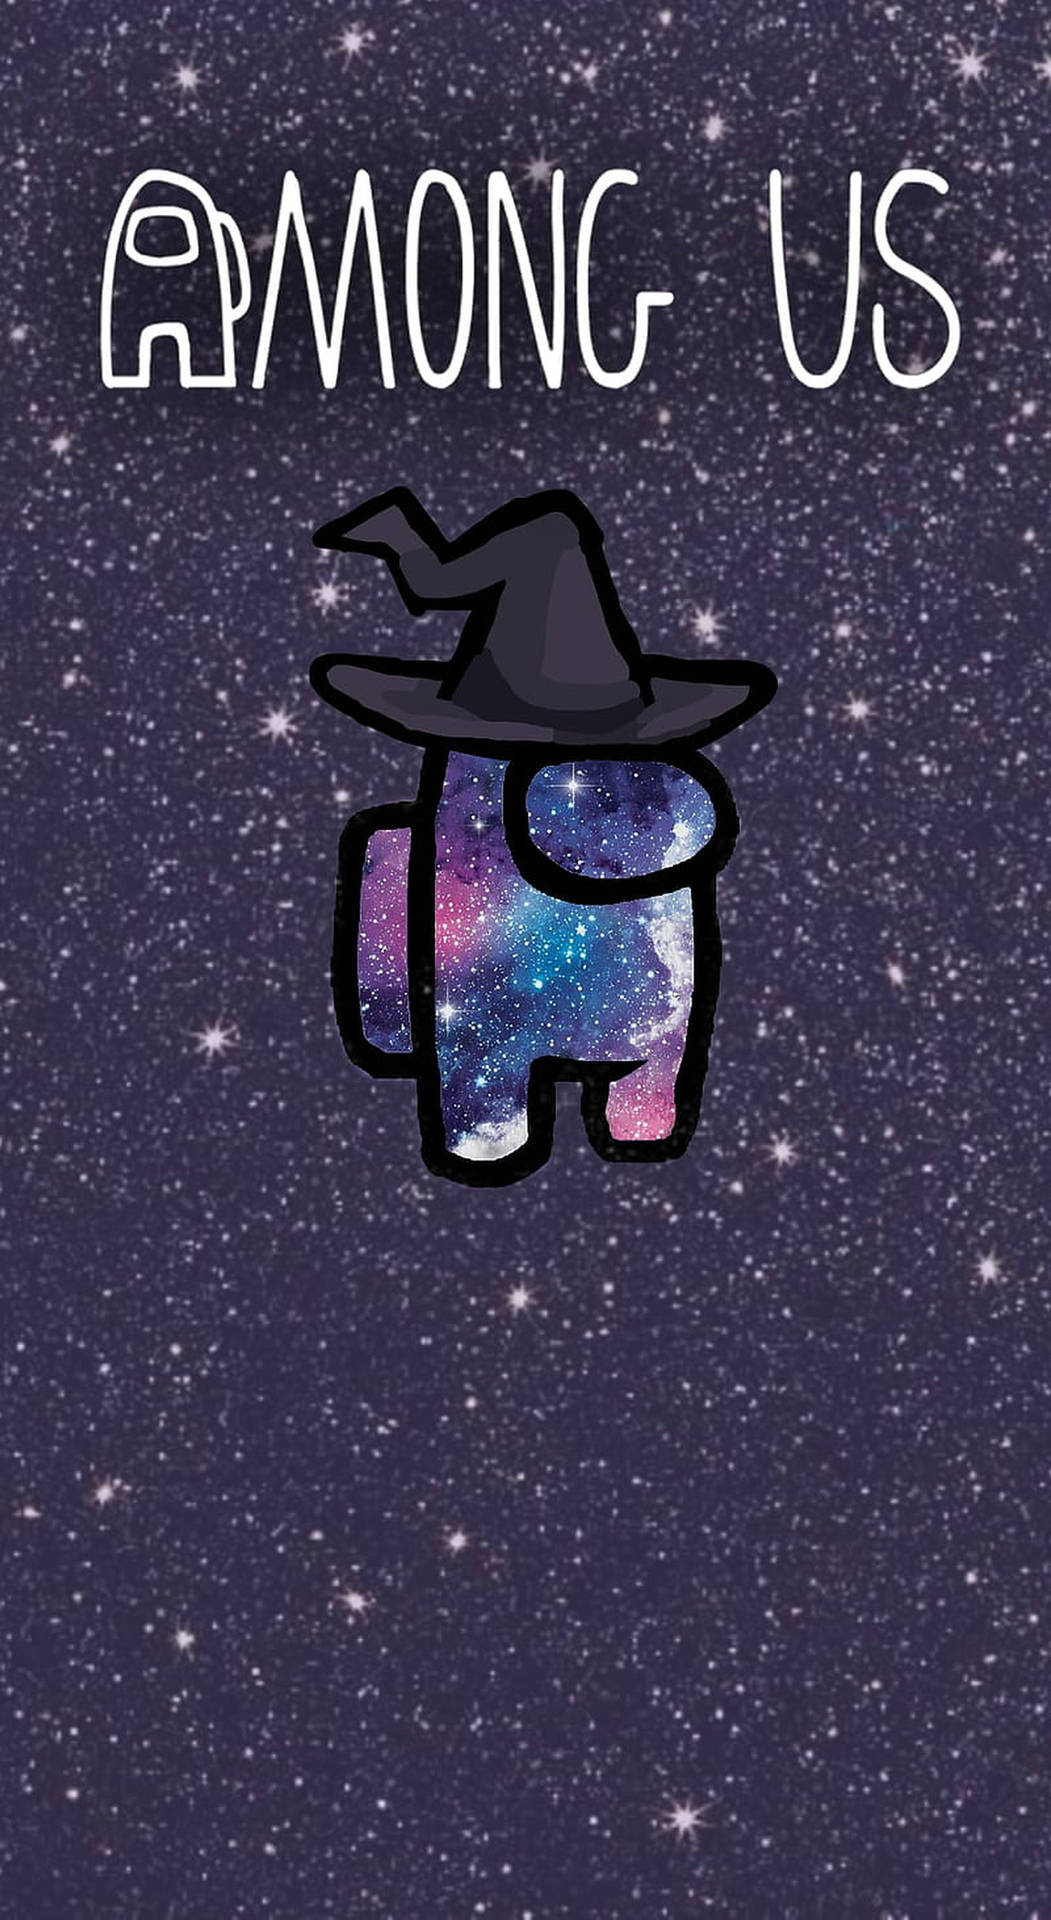 Witch Hat Among Us Space Background